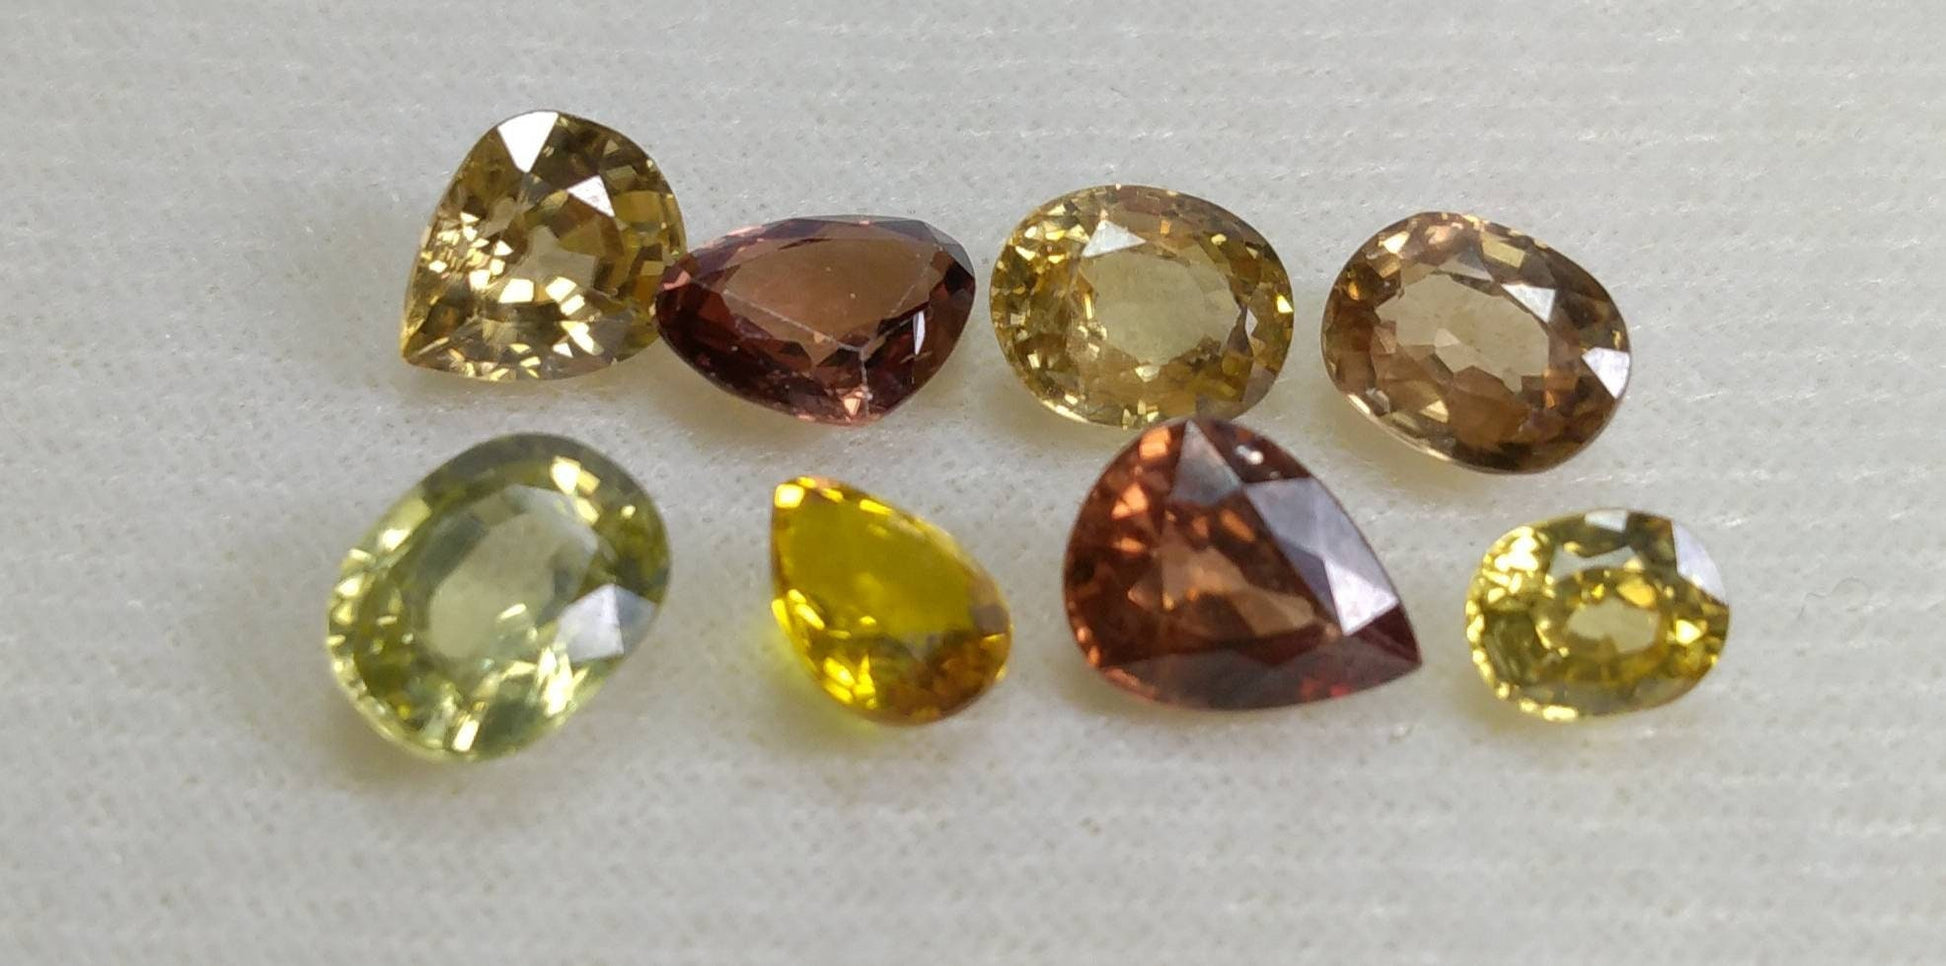 ARSAA GEMS AND MINERALSNatural top quality beautiful 16 Carat small lot of faceted VV clarity zircon gems - Premium  from ARSAA GEMS AND MINERALS - Just $80.00! Shop now at ARSAA GEMS AND MINERALS